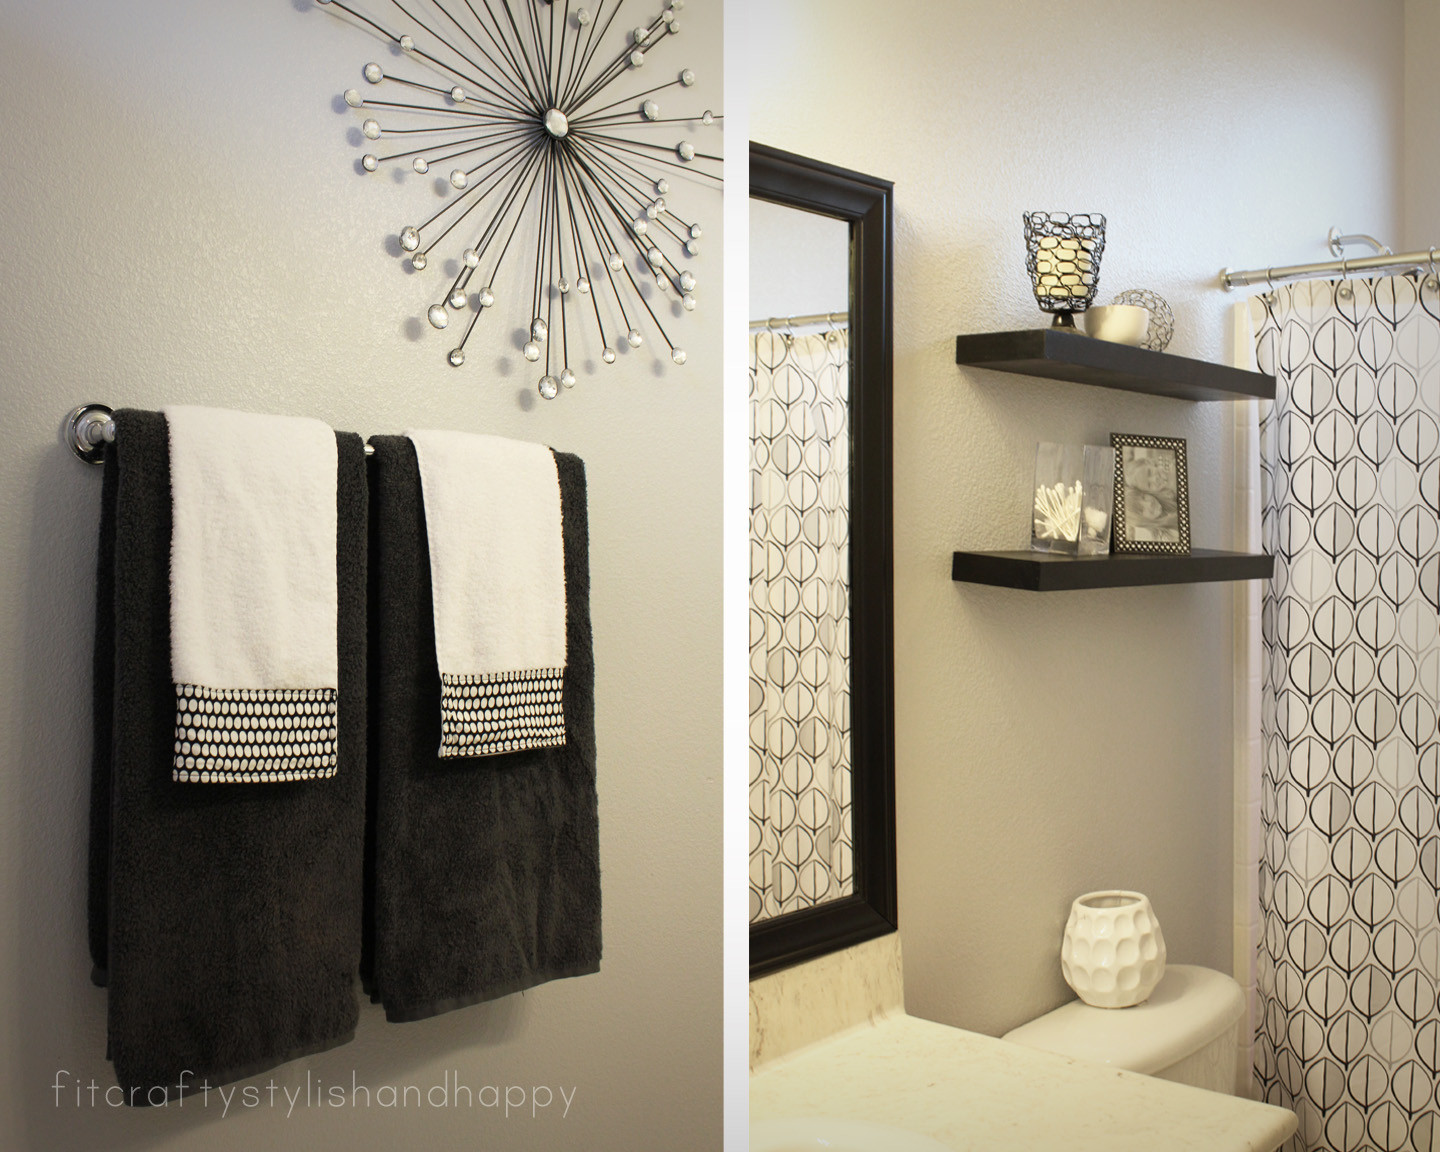 Black And Silver Bathroom Decor
 Fit Crafty Stylish and Happy Guest Bathroom Makeover